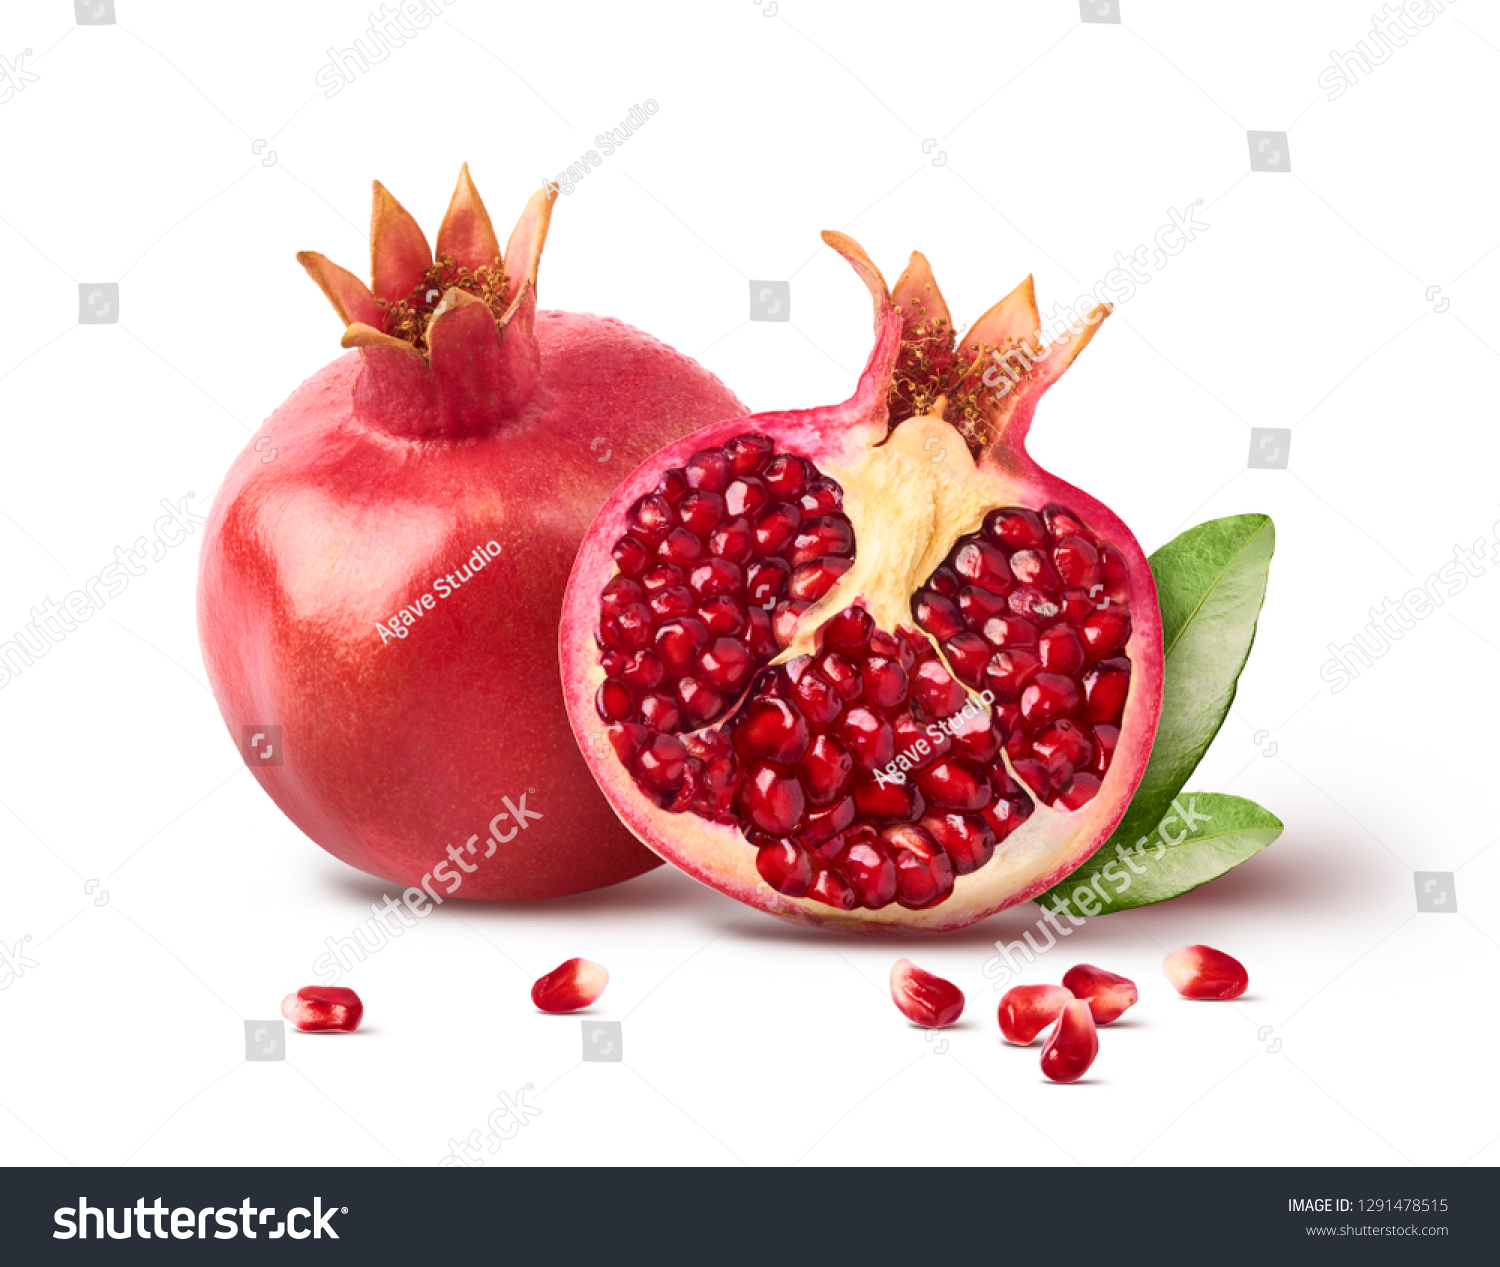 Fresh ripe pomegranate with green leaves isolated on white background. High resolution image #1291478515